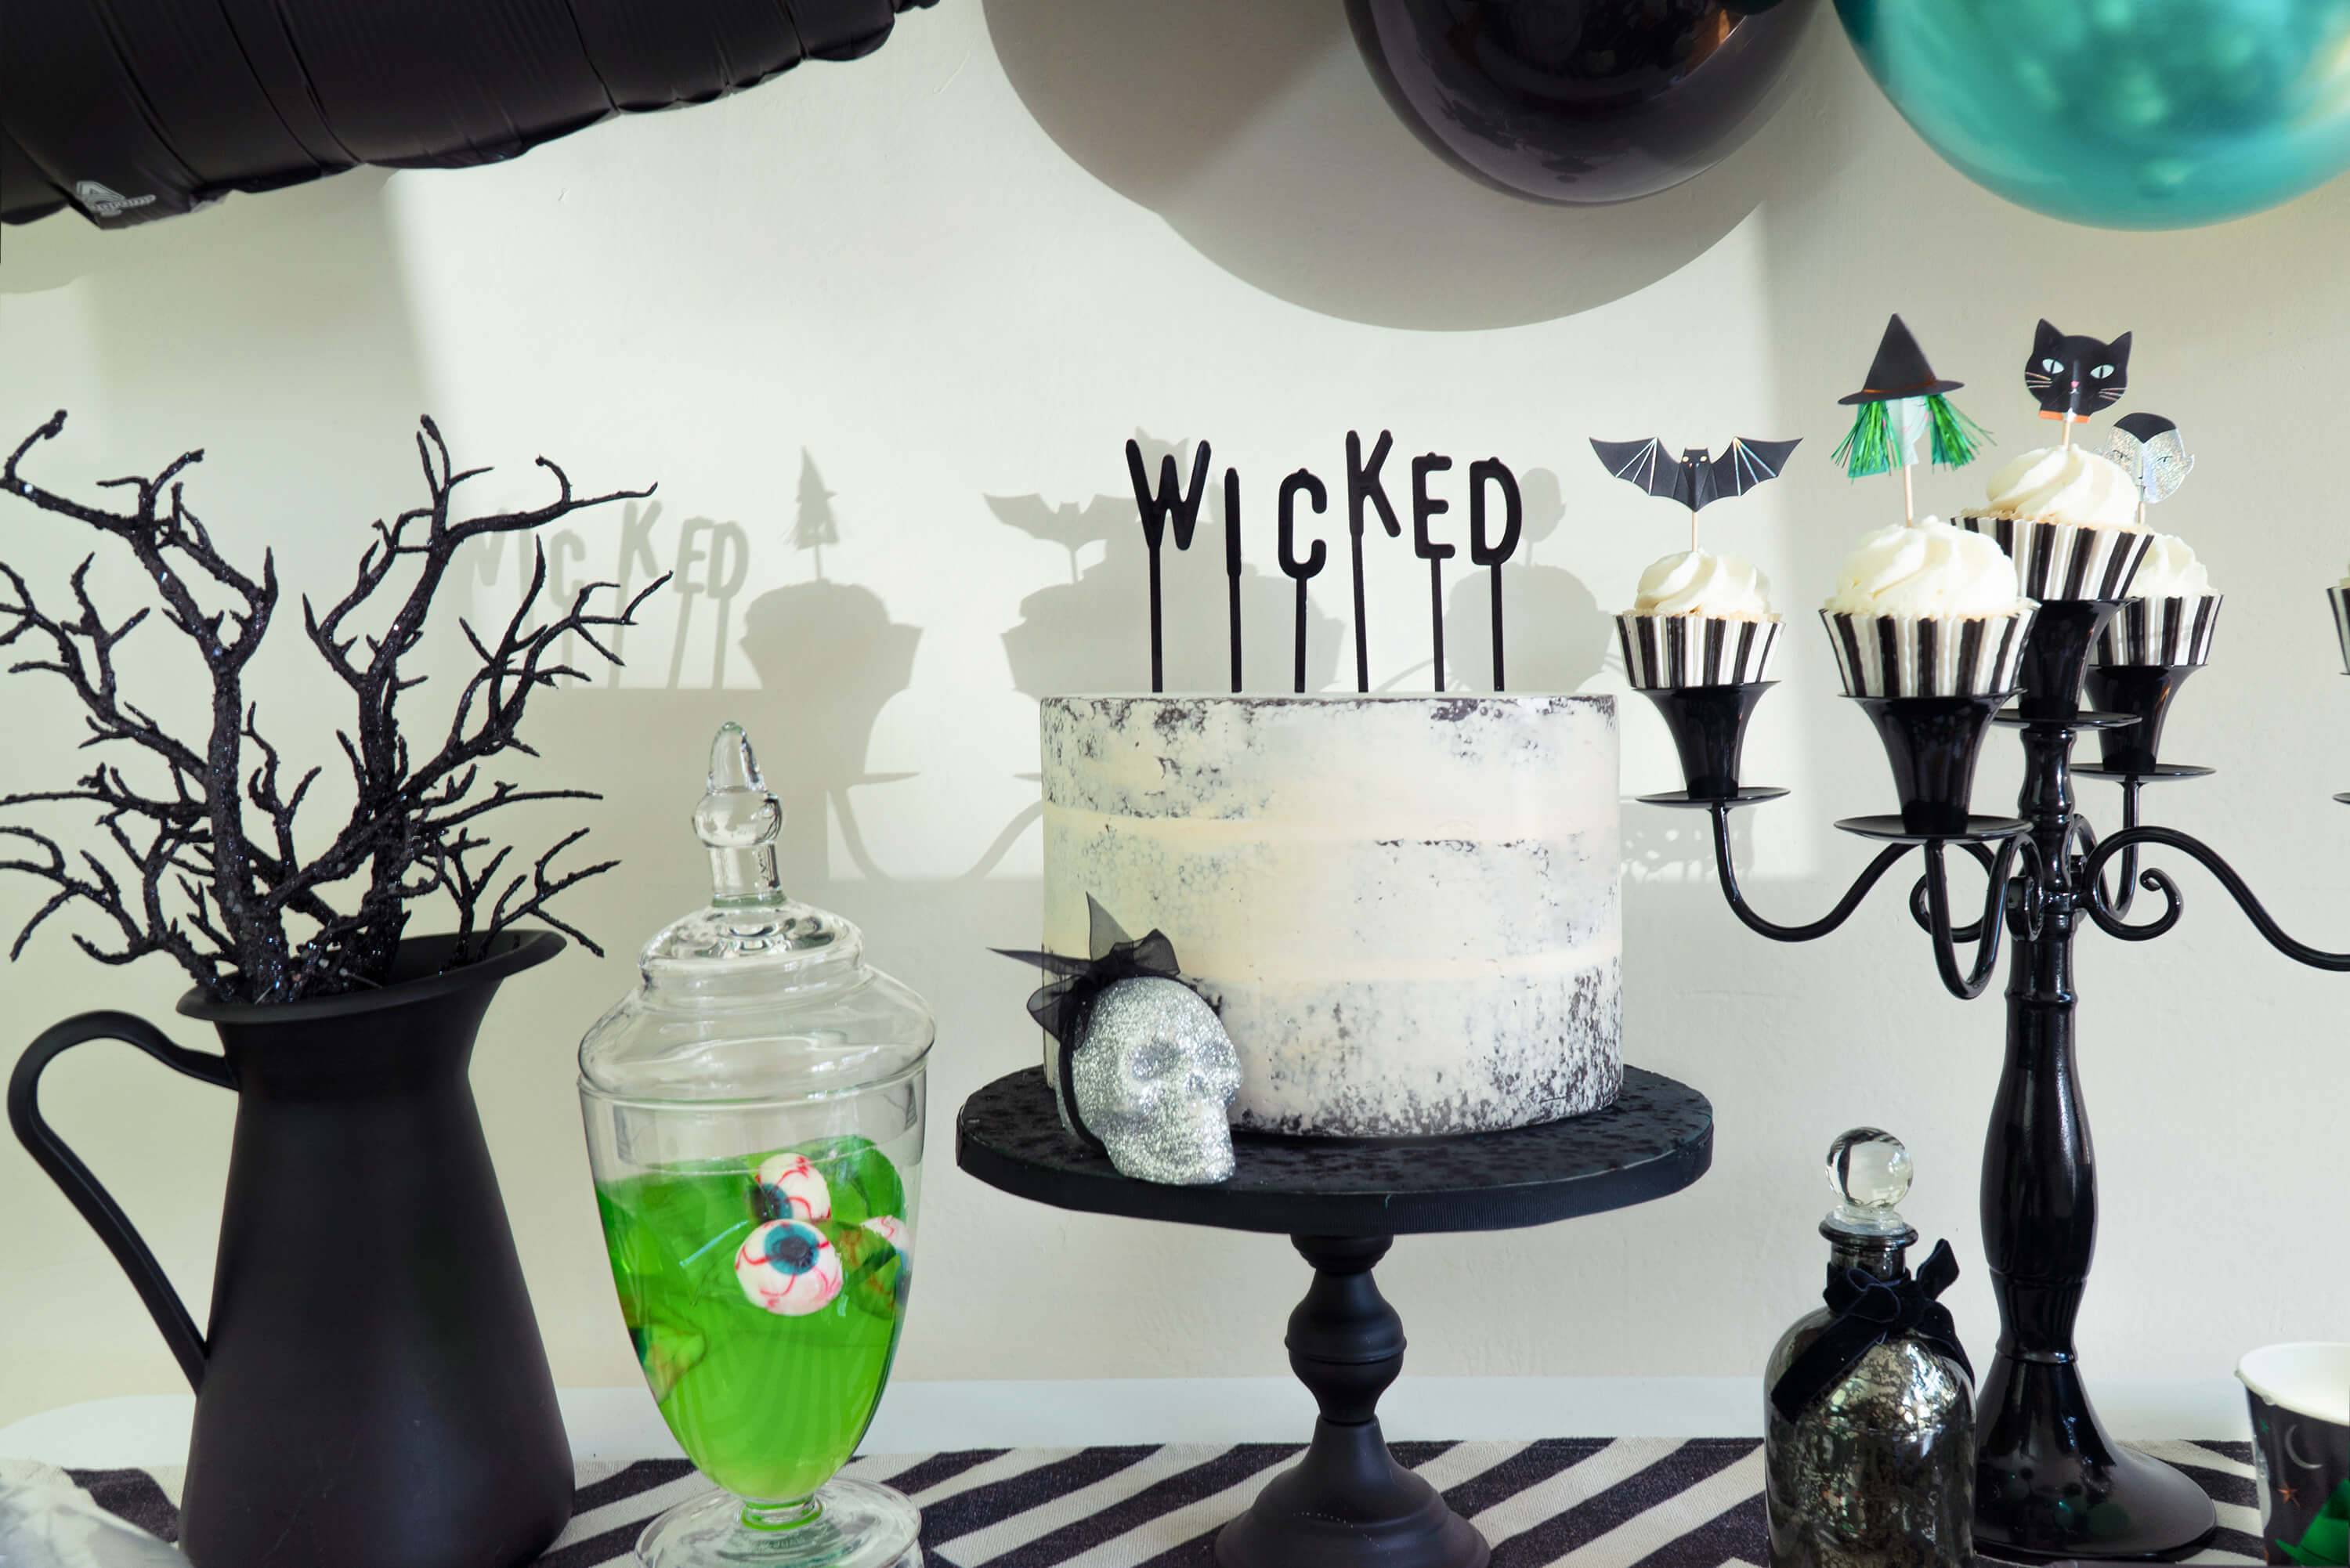 Fun Halloween Ideas for Kids While Social Distancing